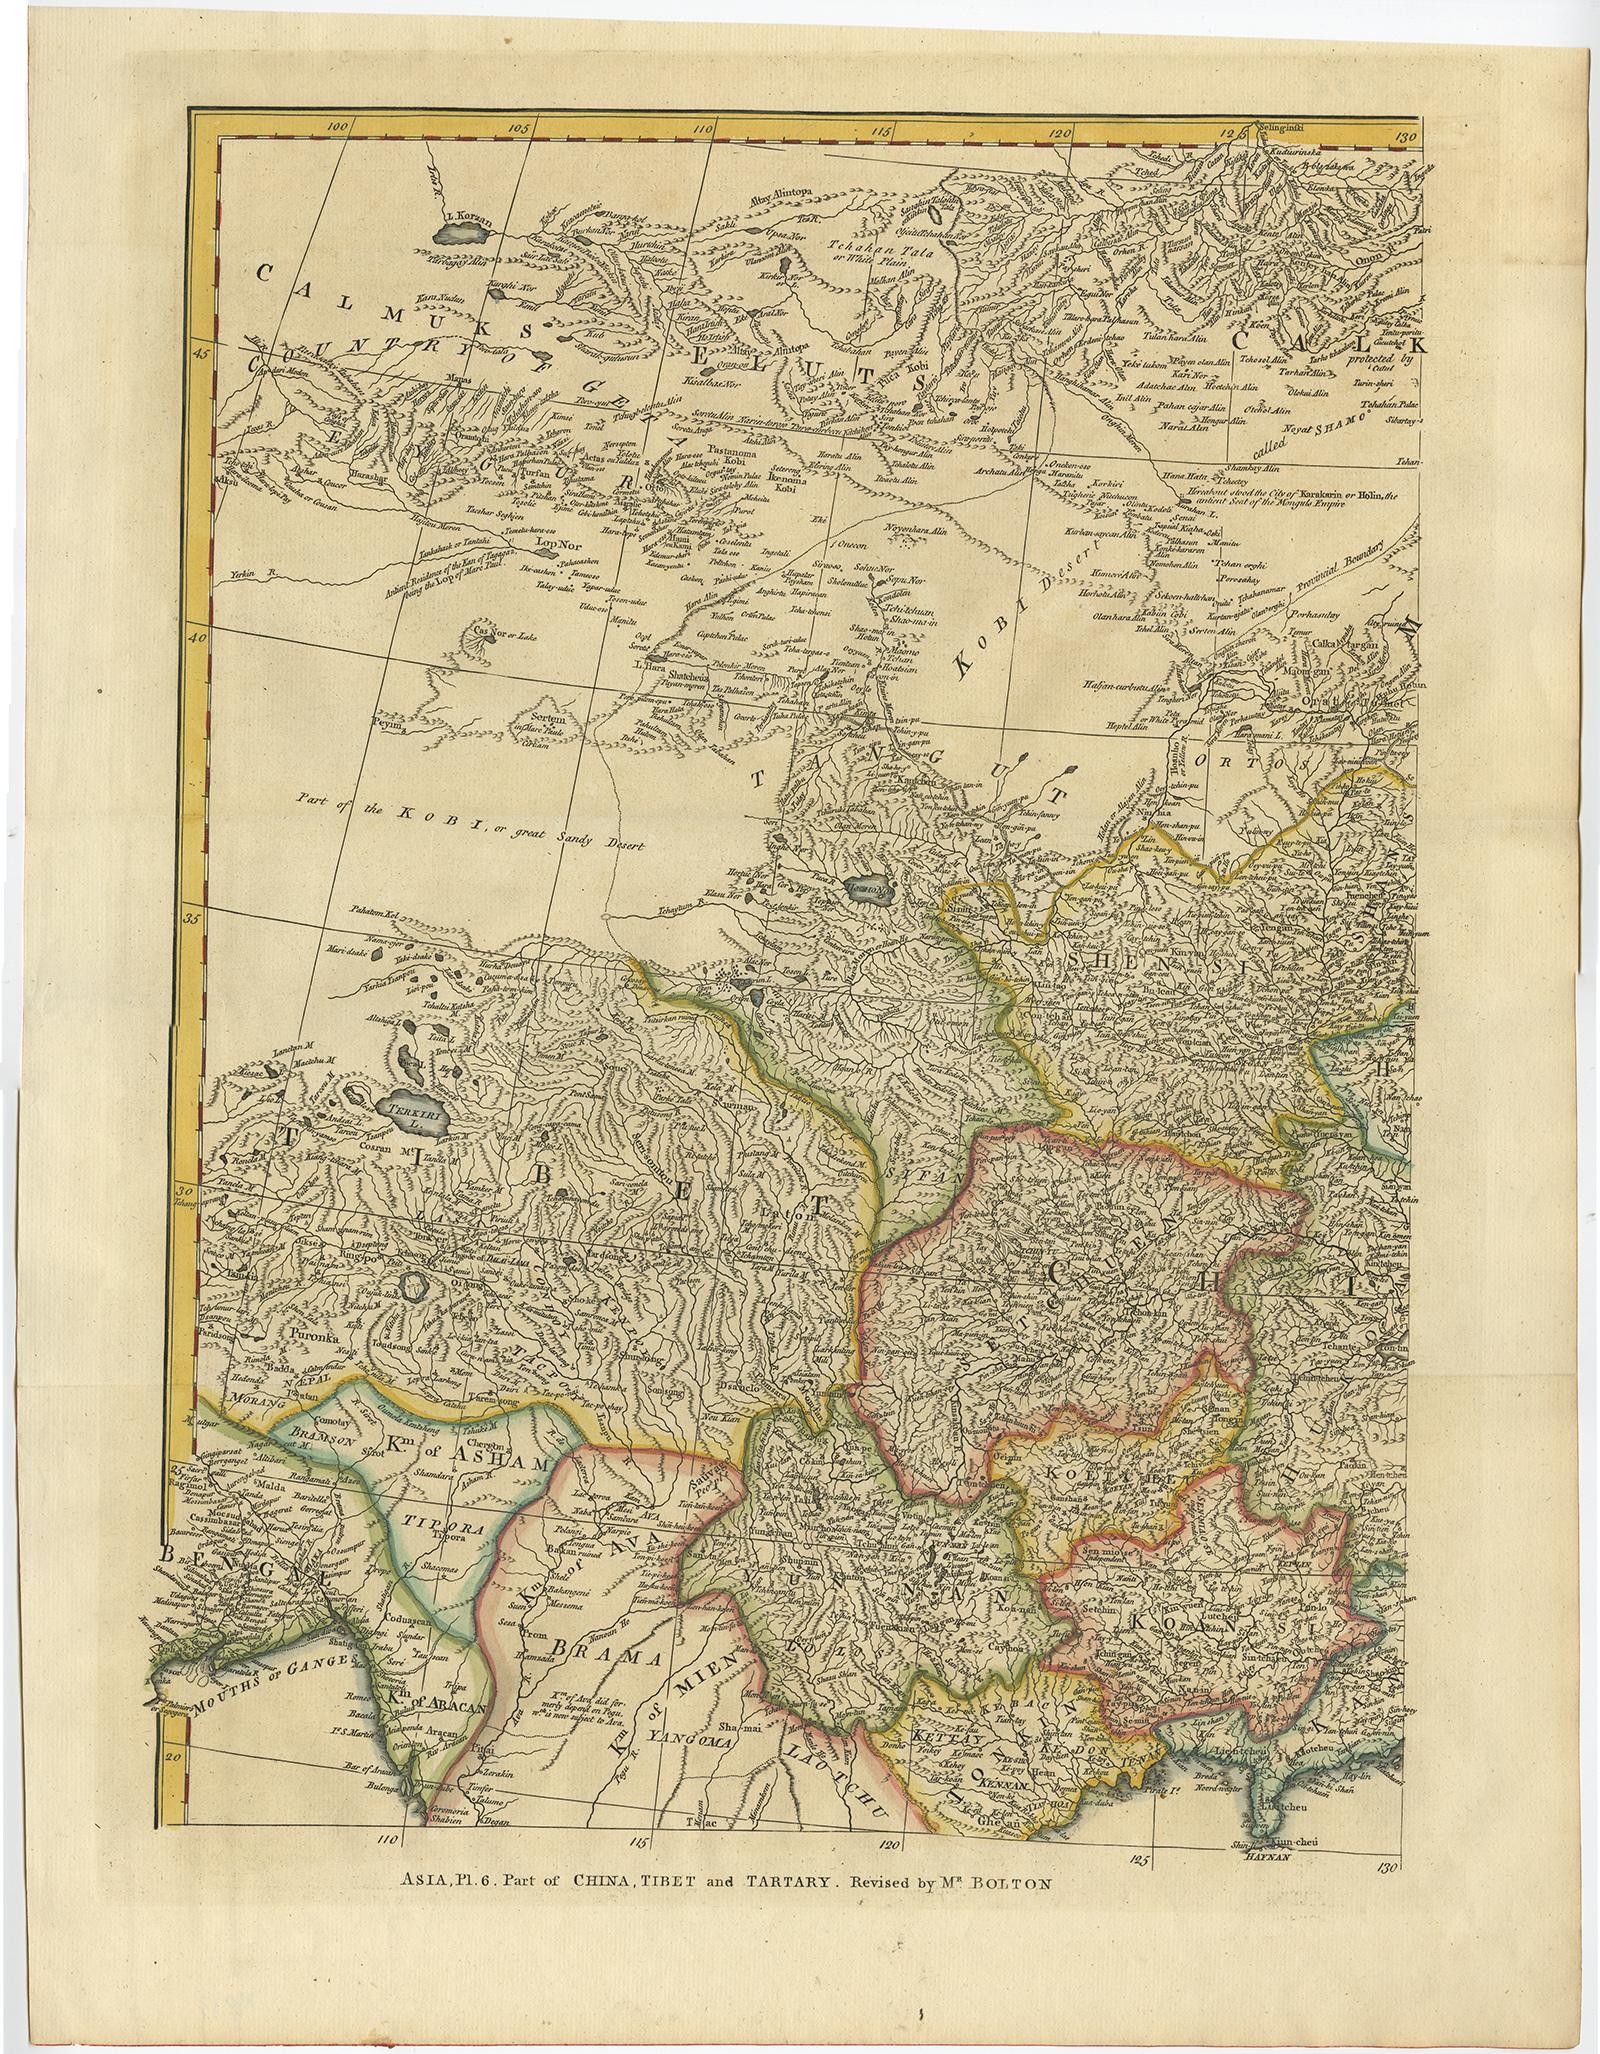 Set of four antique maps of Asia:

1) Asia plate 6, Part of China, Tibet and Tartary
2) Asia plate 2, Japan, Corea, the Monguls and part of China
3) Asia plate 8, Second part of Asia 
4) Asia plate 3, The Philippin, Carolin, Molucka and Spice